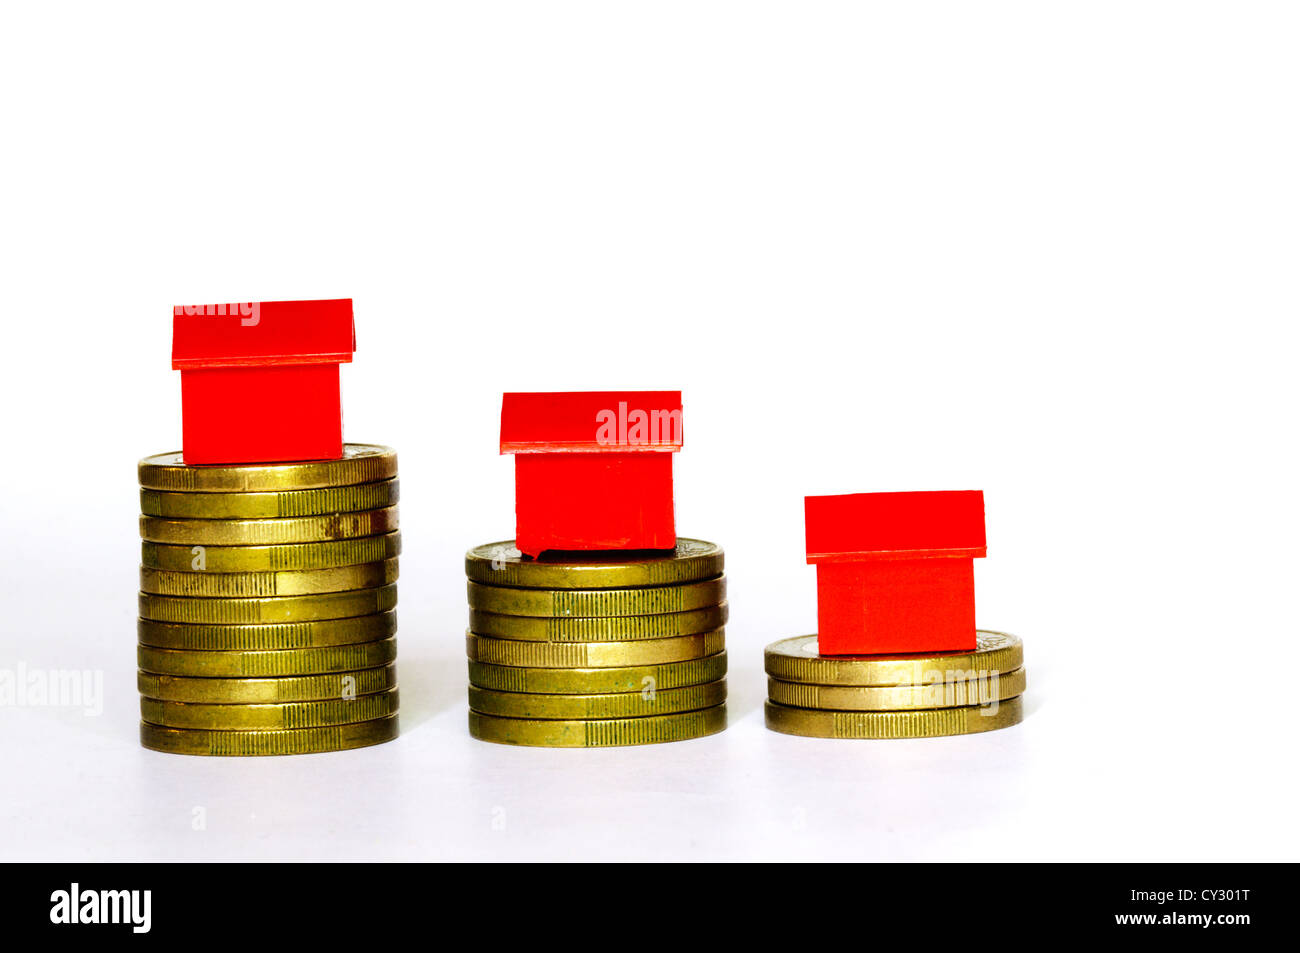 Plastic model houses balanced on top of stacks of coins. Stock Photo